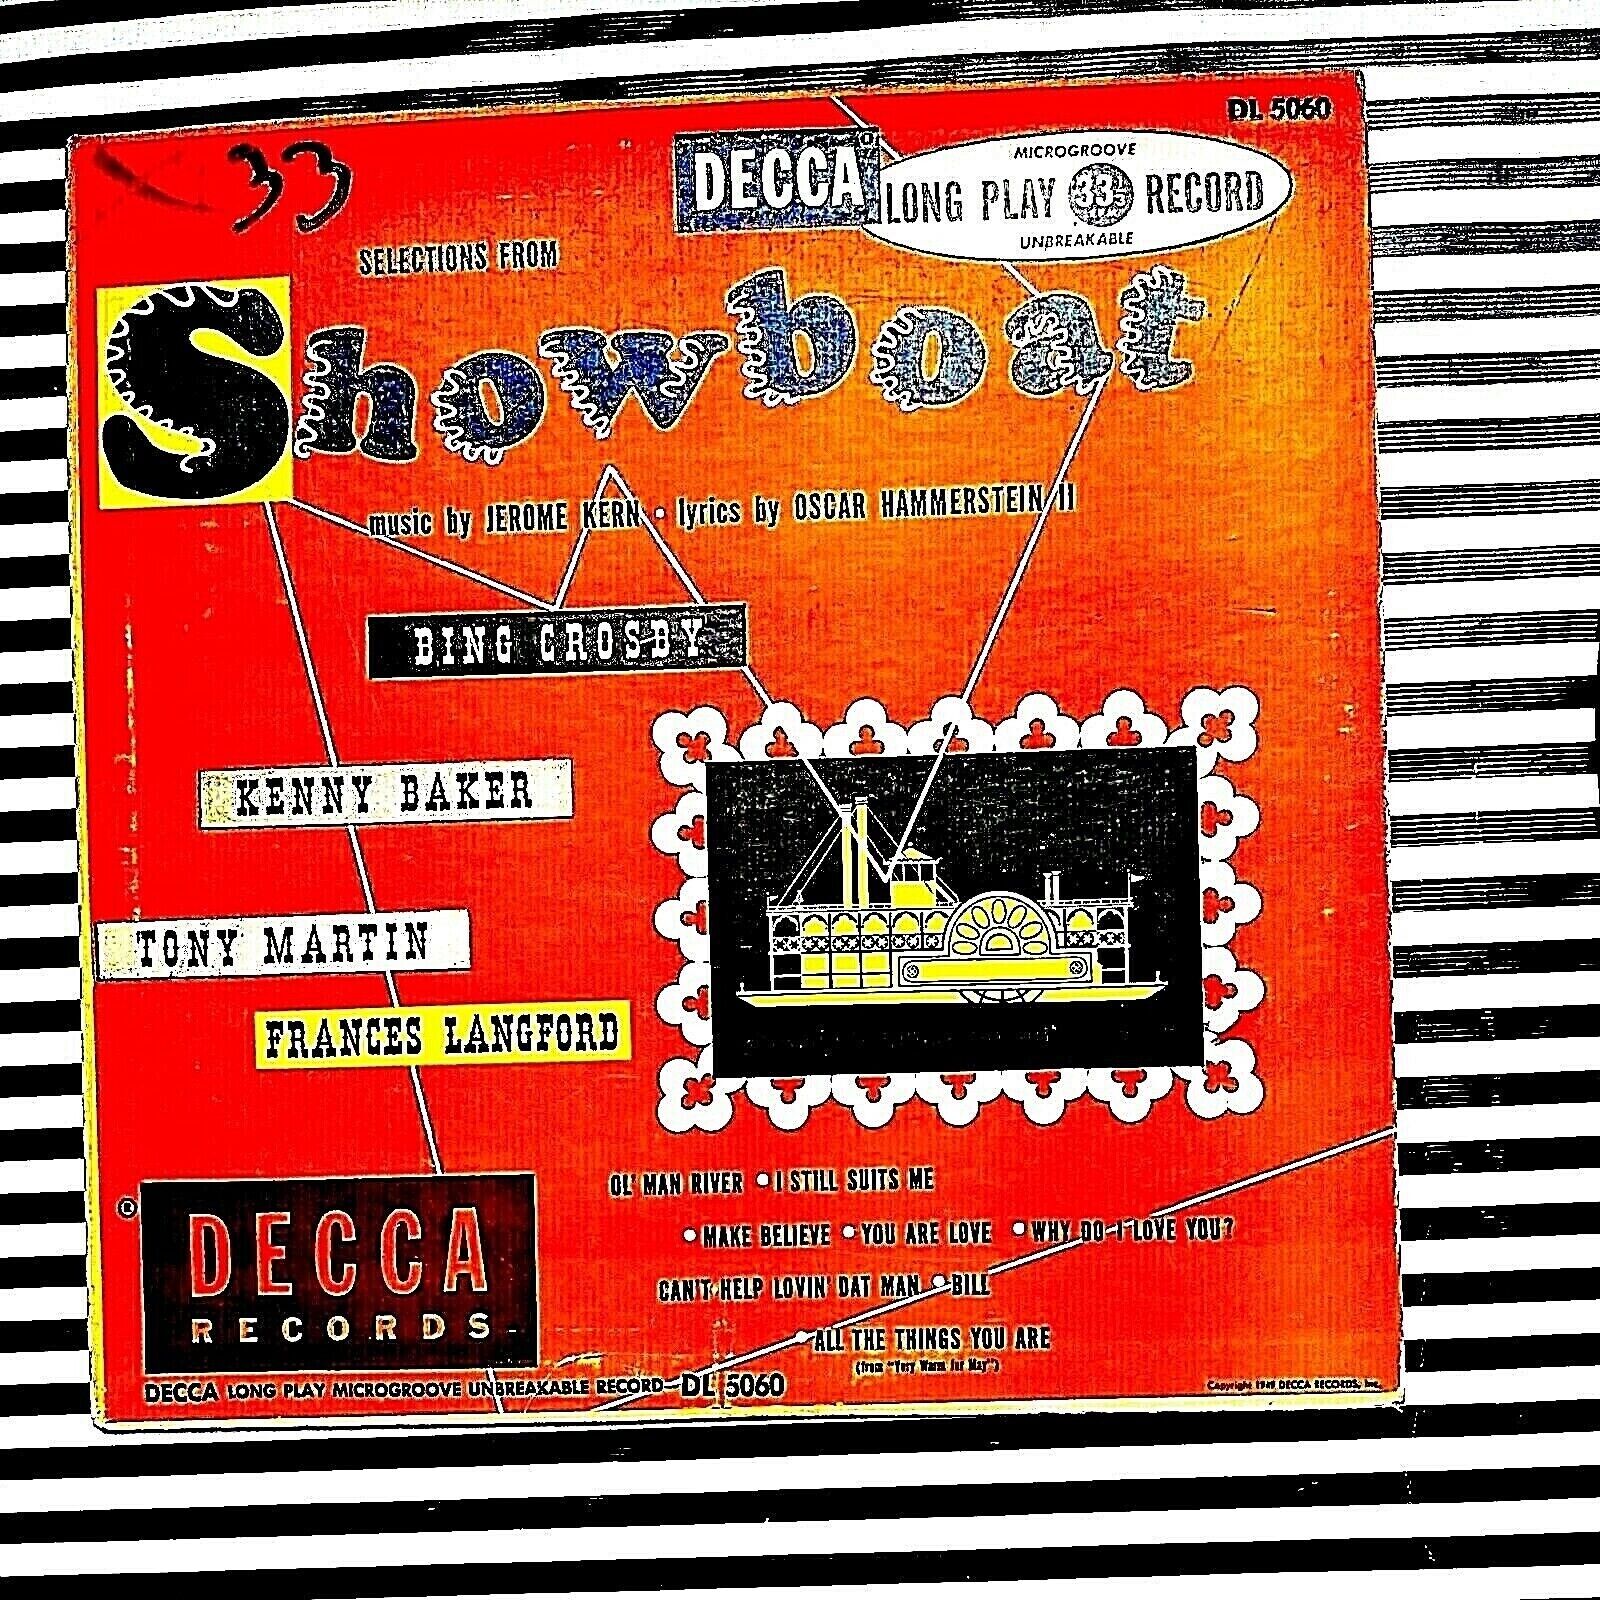 SELECTIONS FROM SHOWBOAT DECCA VTG 1949 VINYL LP Record